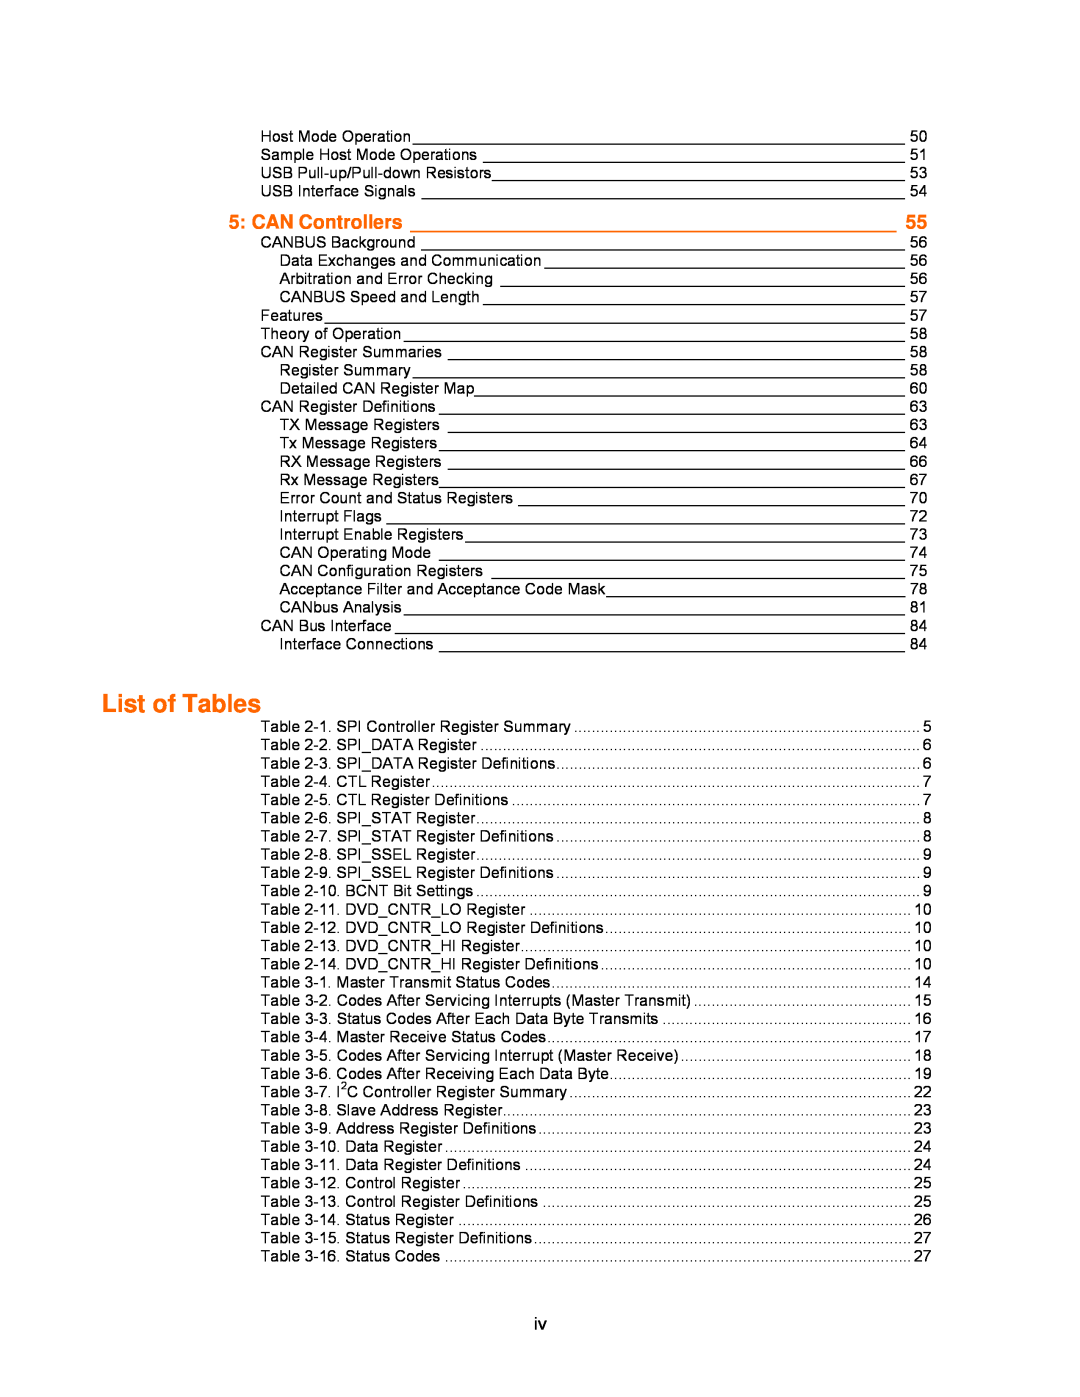 Lantronix DSTni-EX manual List of Tables, CAN Controllers 